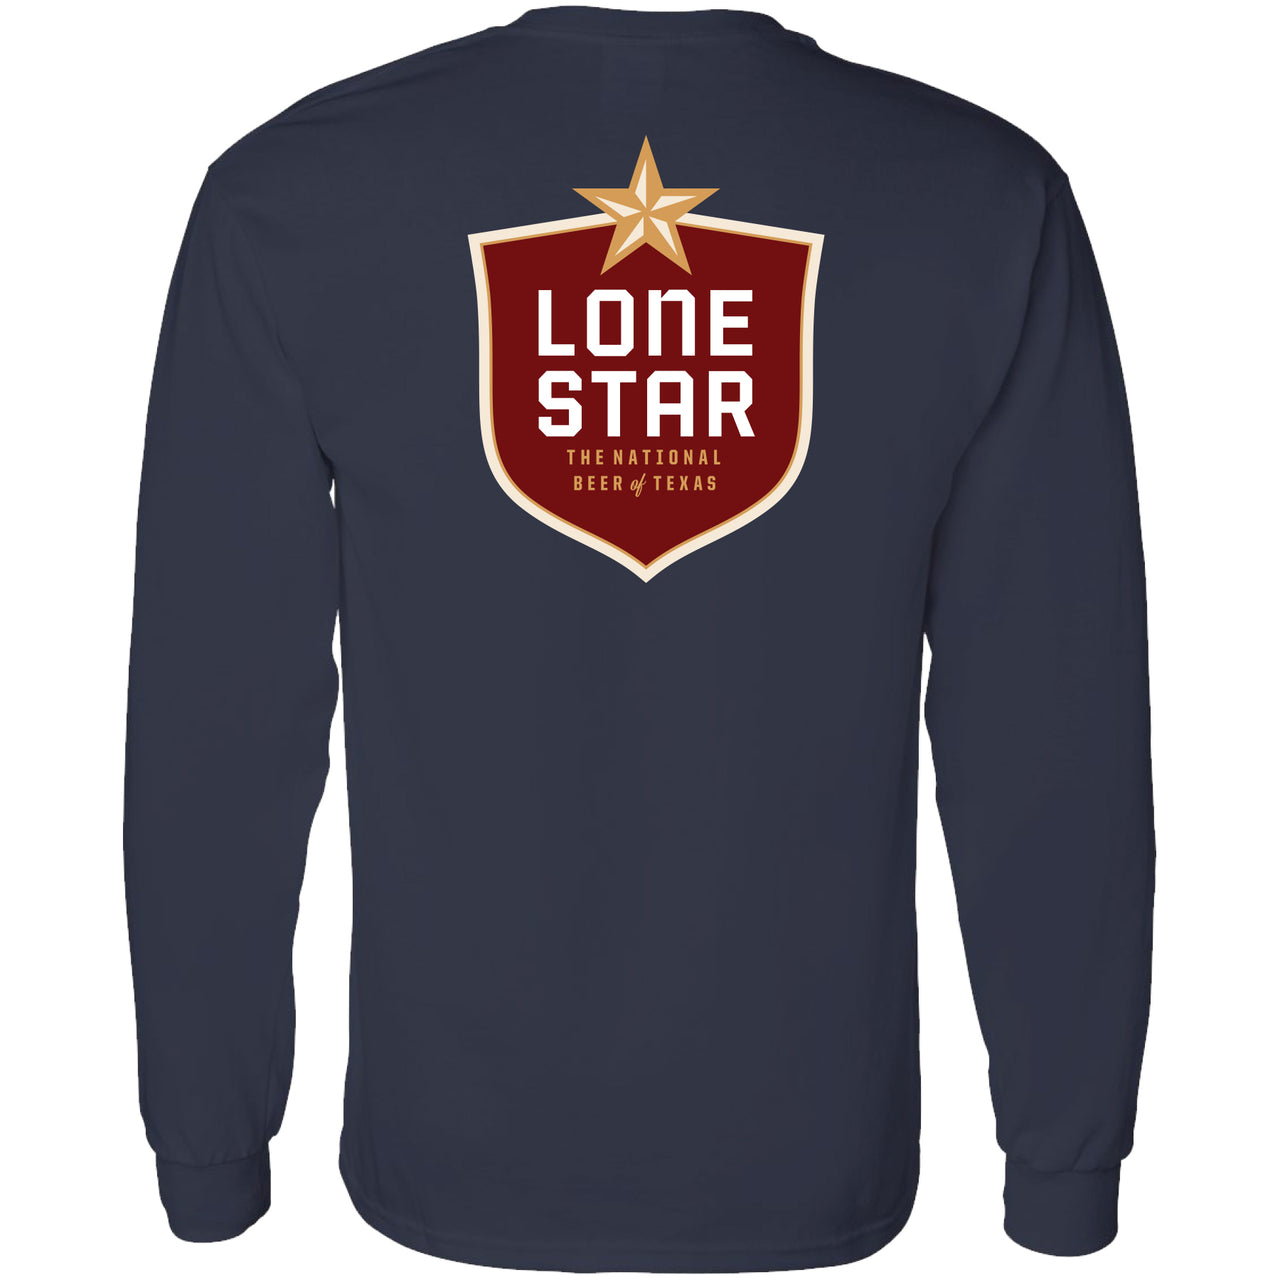 Lone Star - Crest 2-Sided Long Sleeve T-shirt